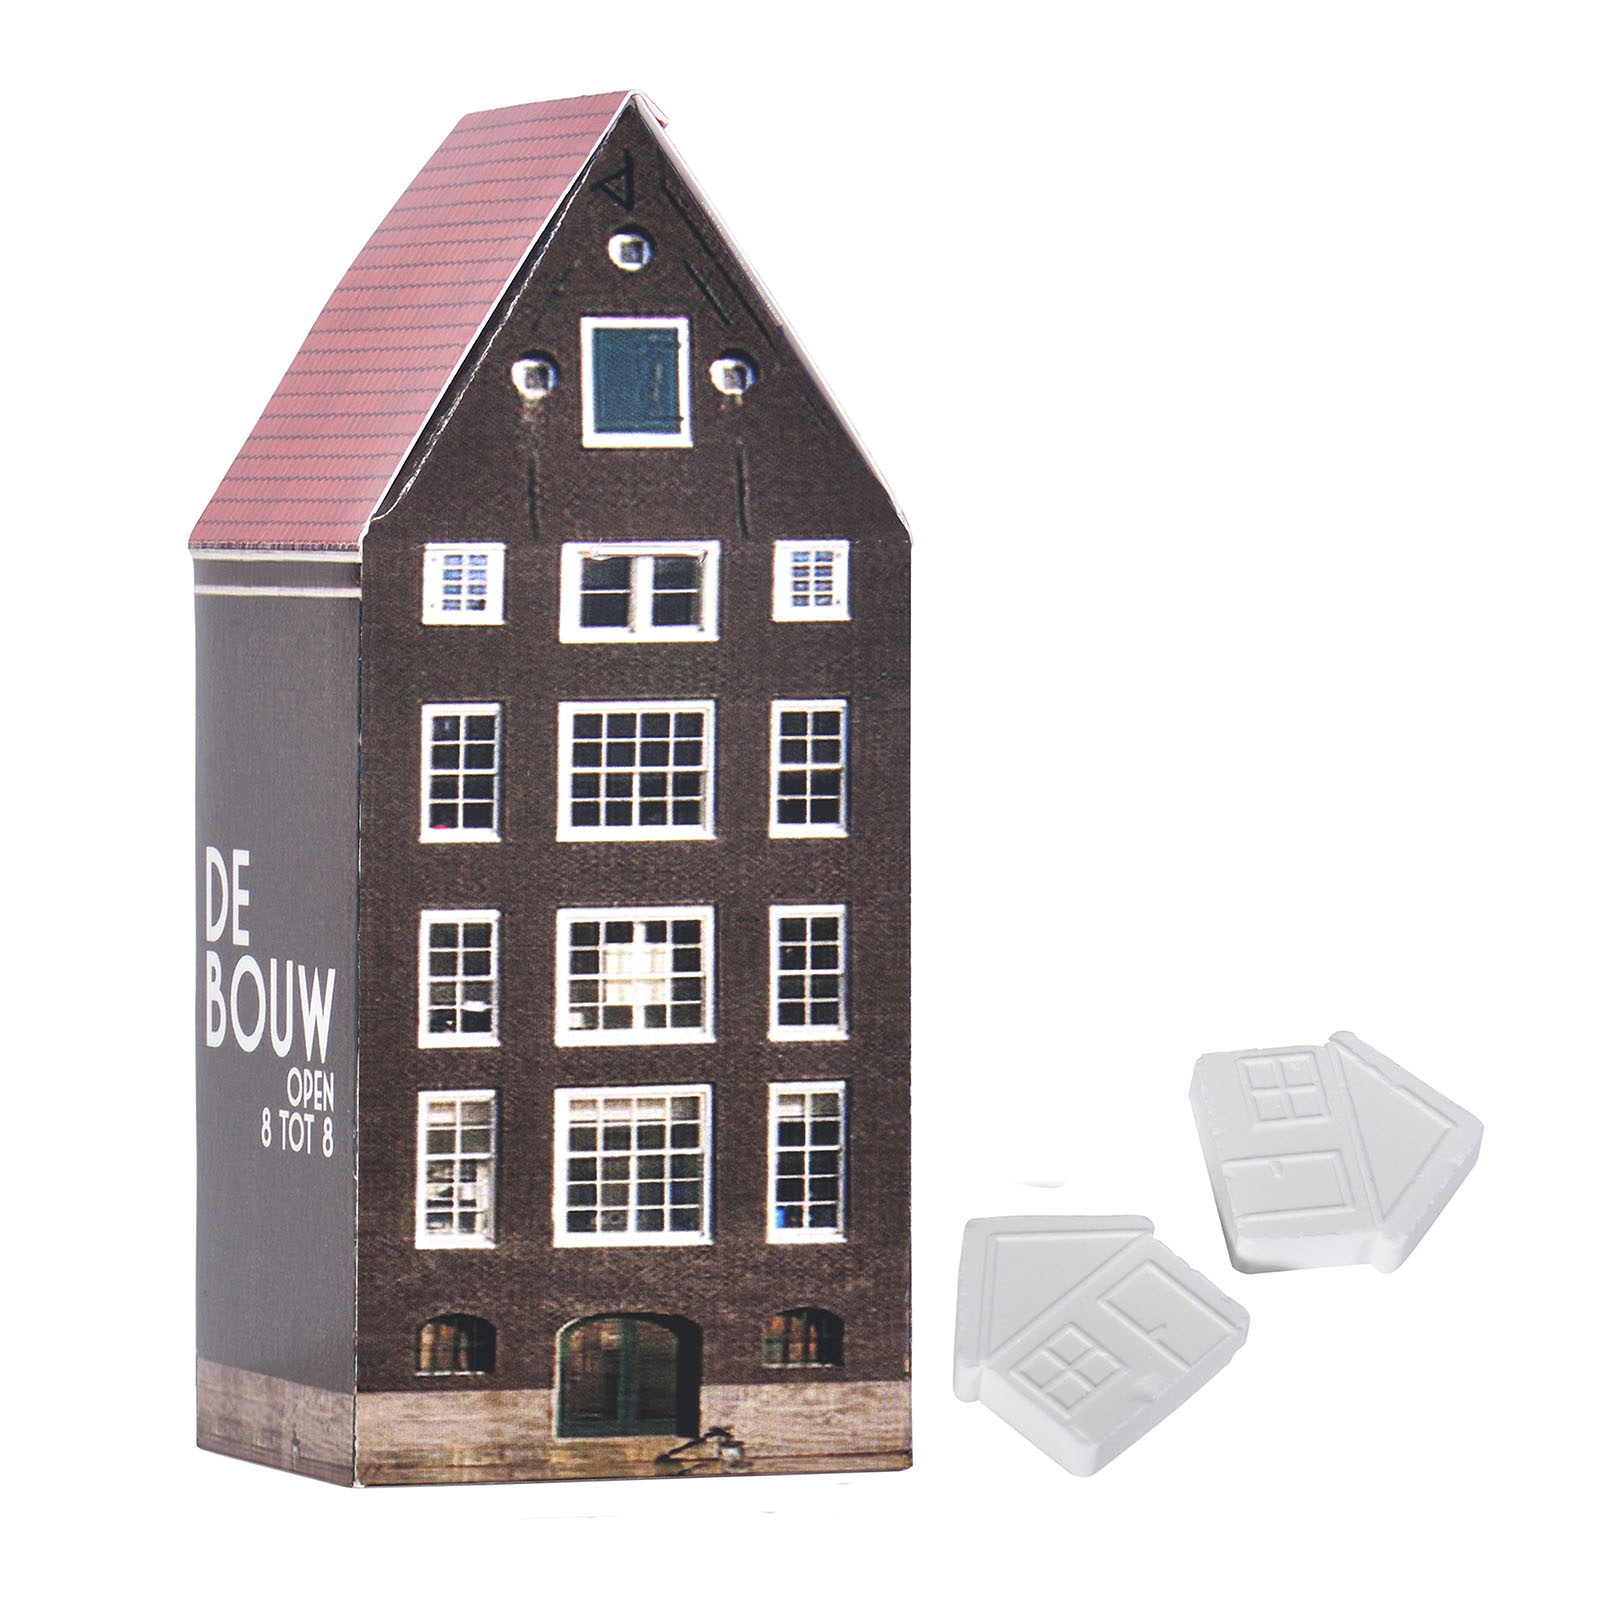 A full-color printed house which contains around 28 grams of house-shaped mints - Denton - Paisley